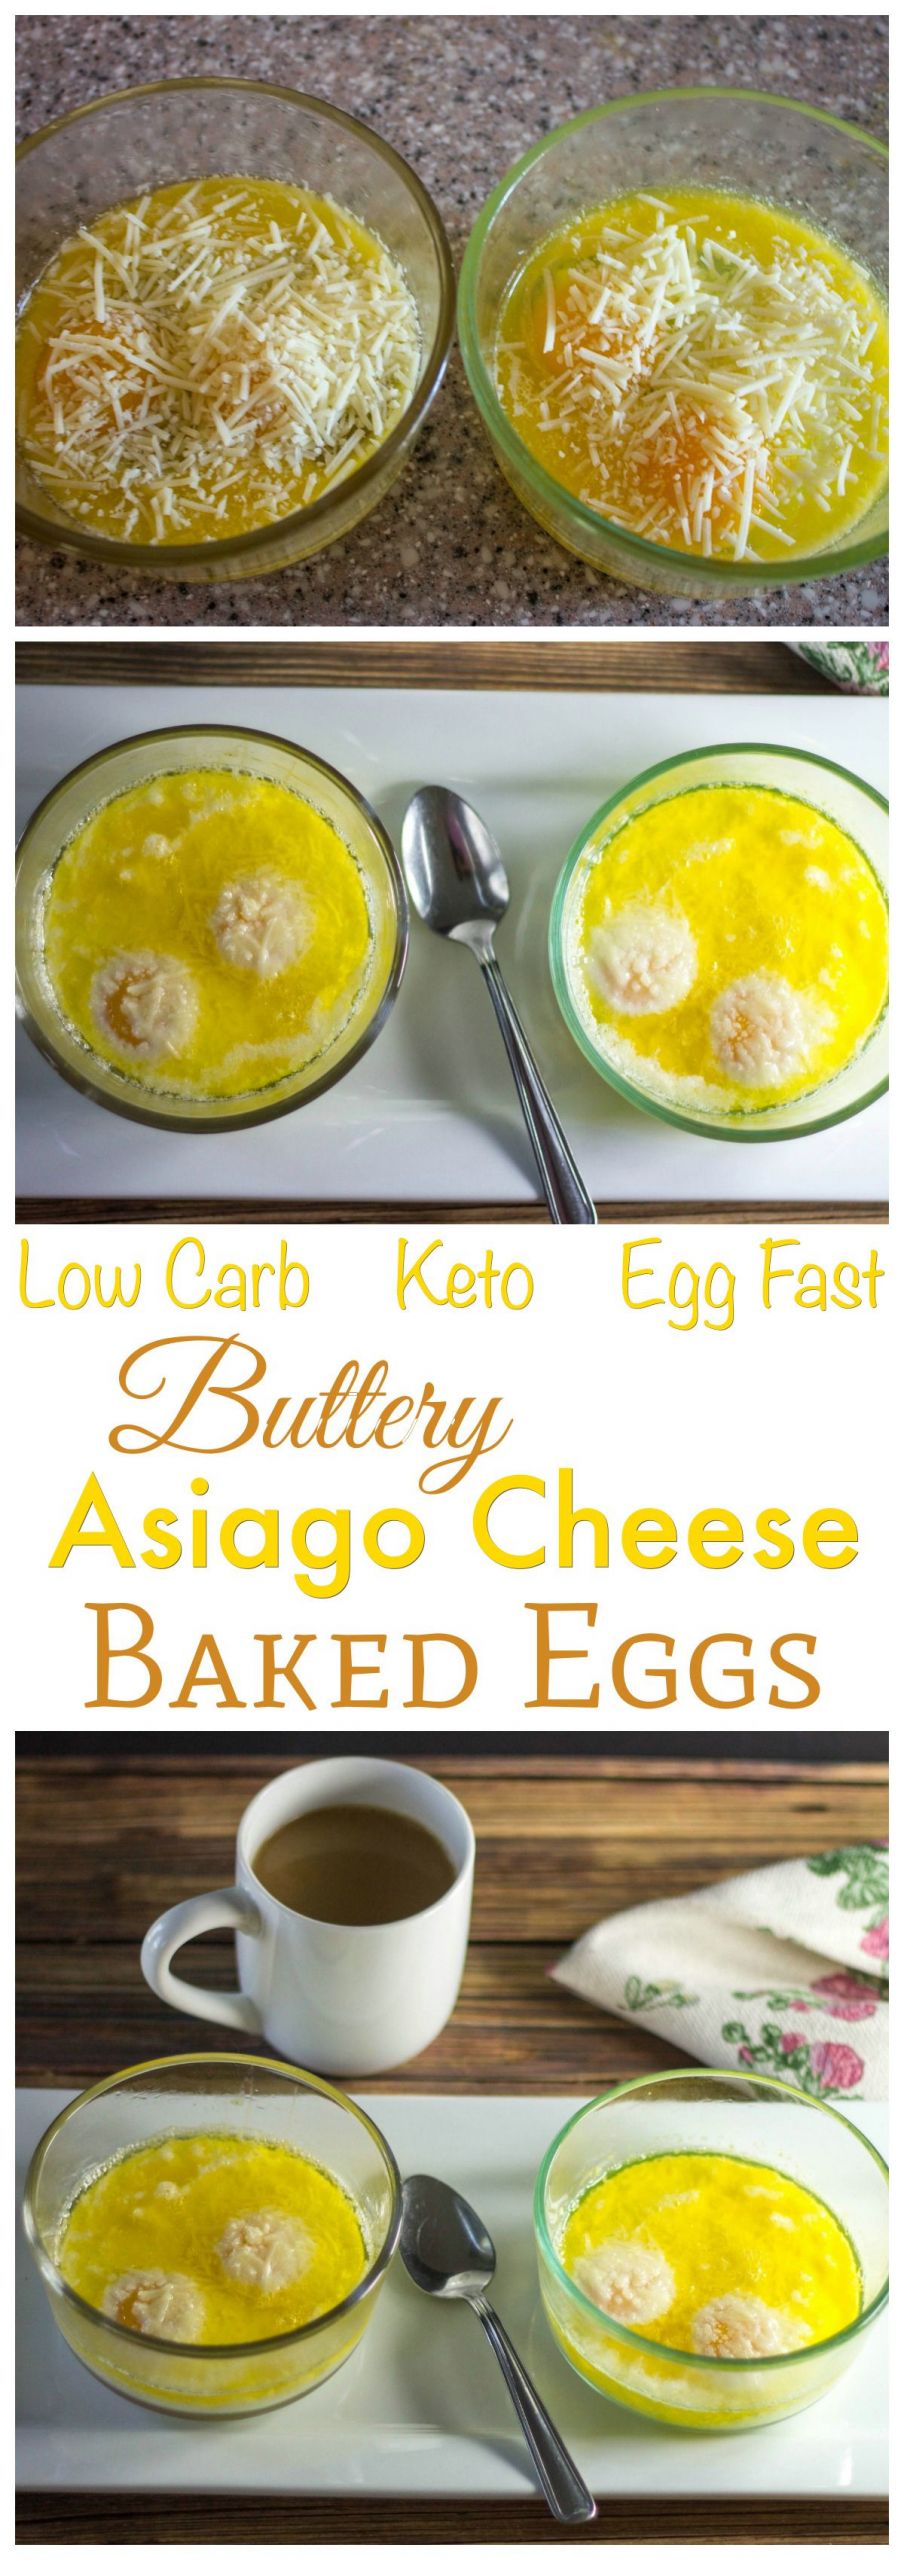 Keto Diet Recipes Breakfast Egg Fast
 These low carb keto t Buttery Asiago Baked Eggs make a